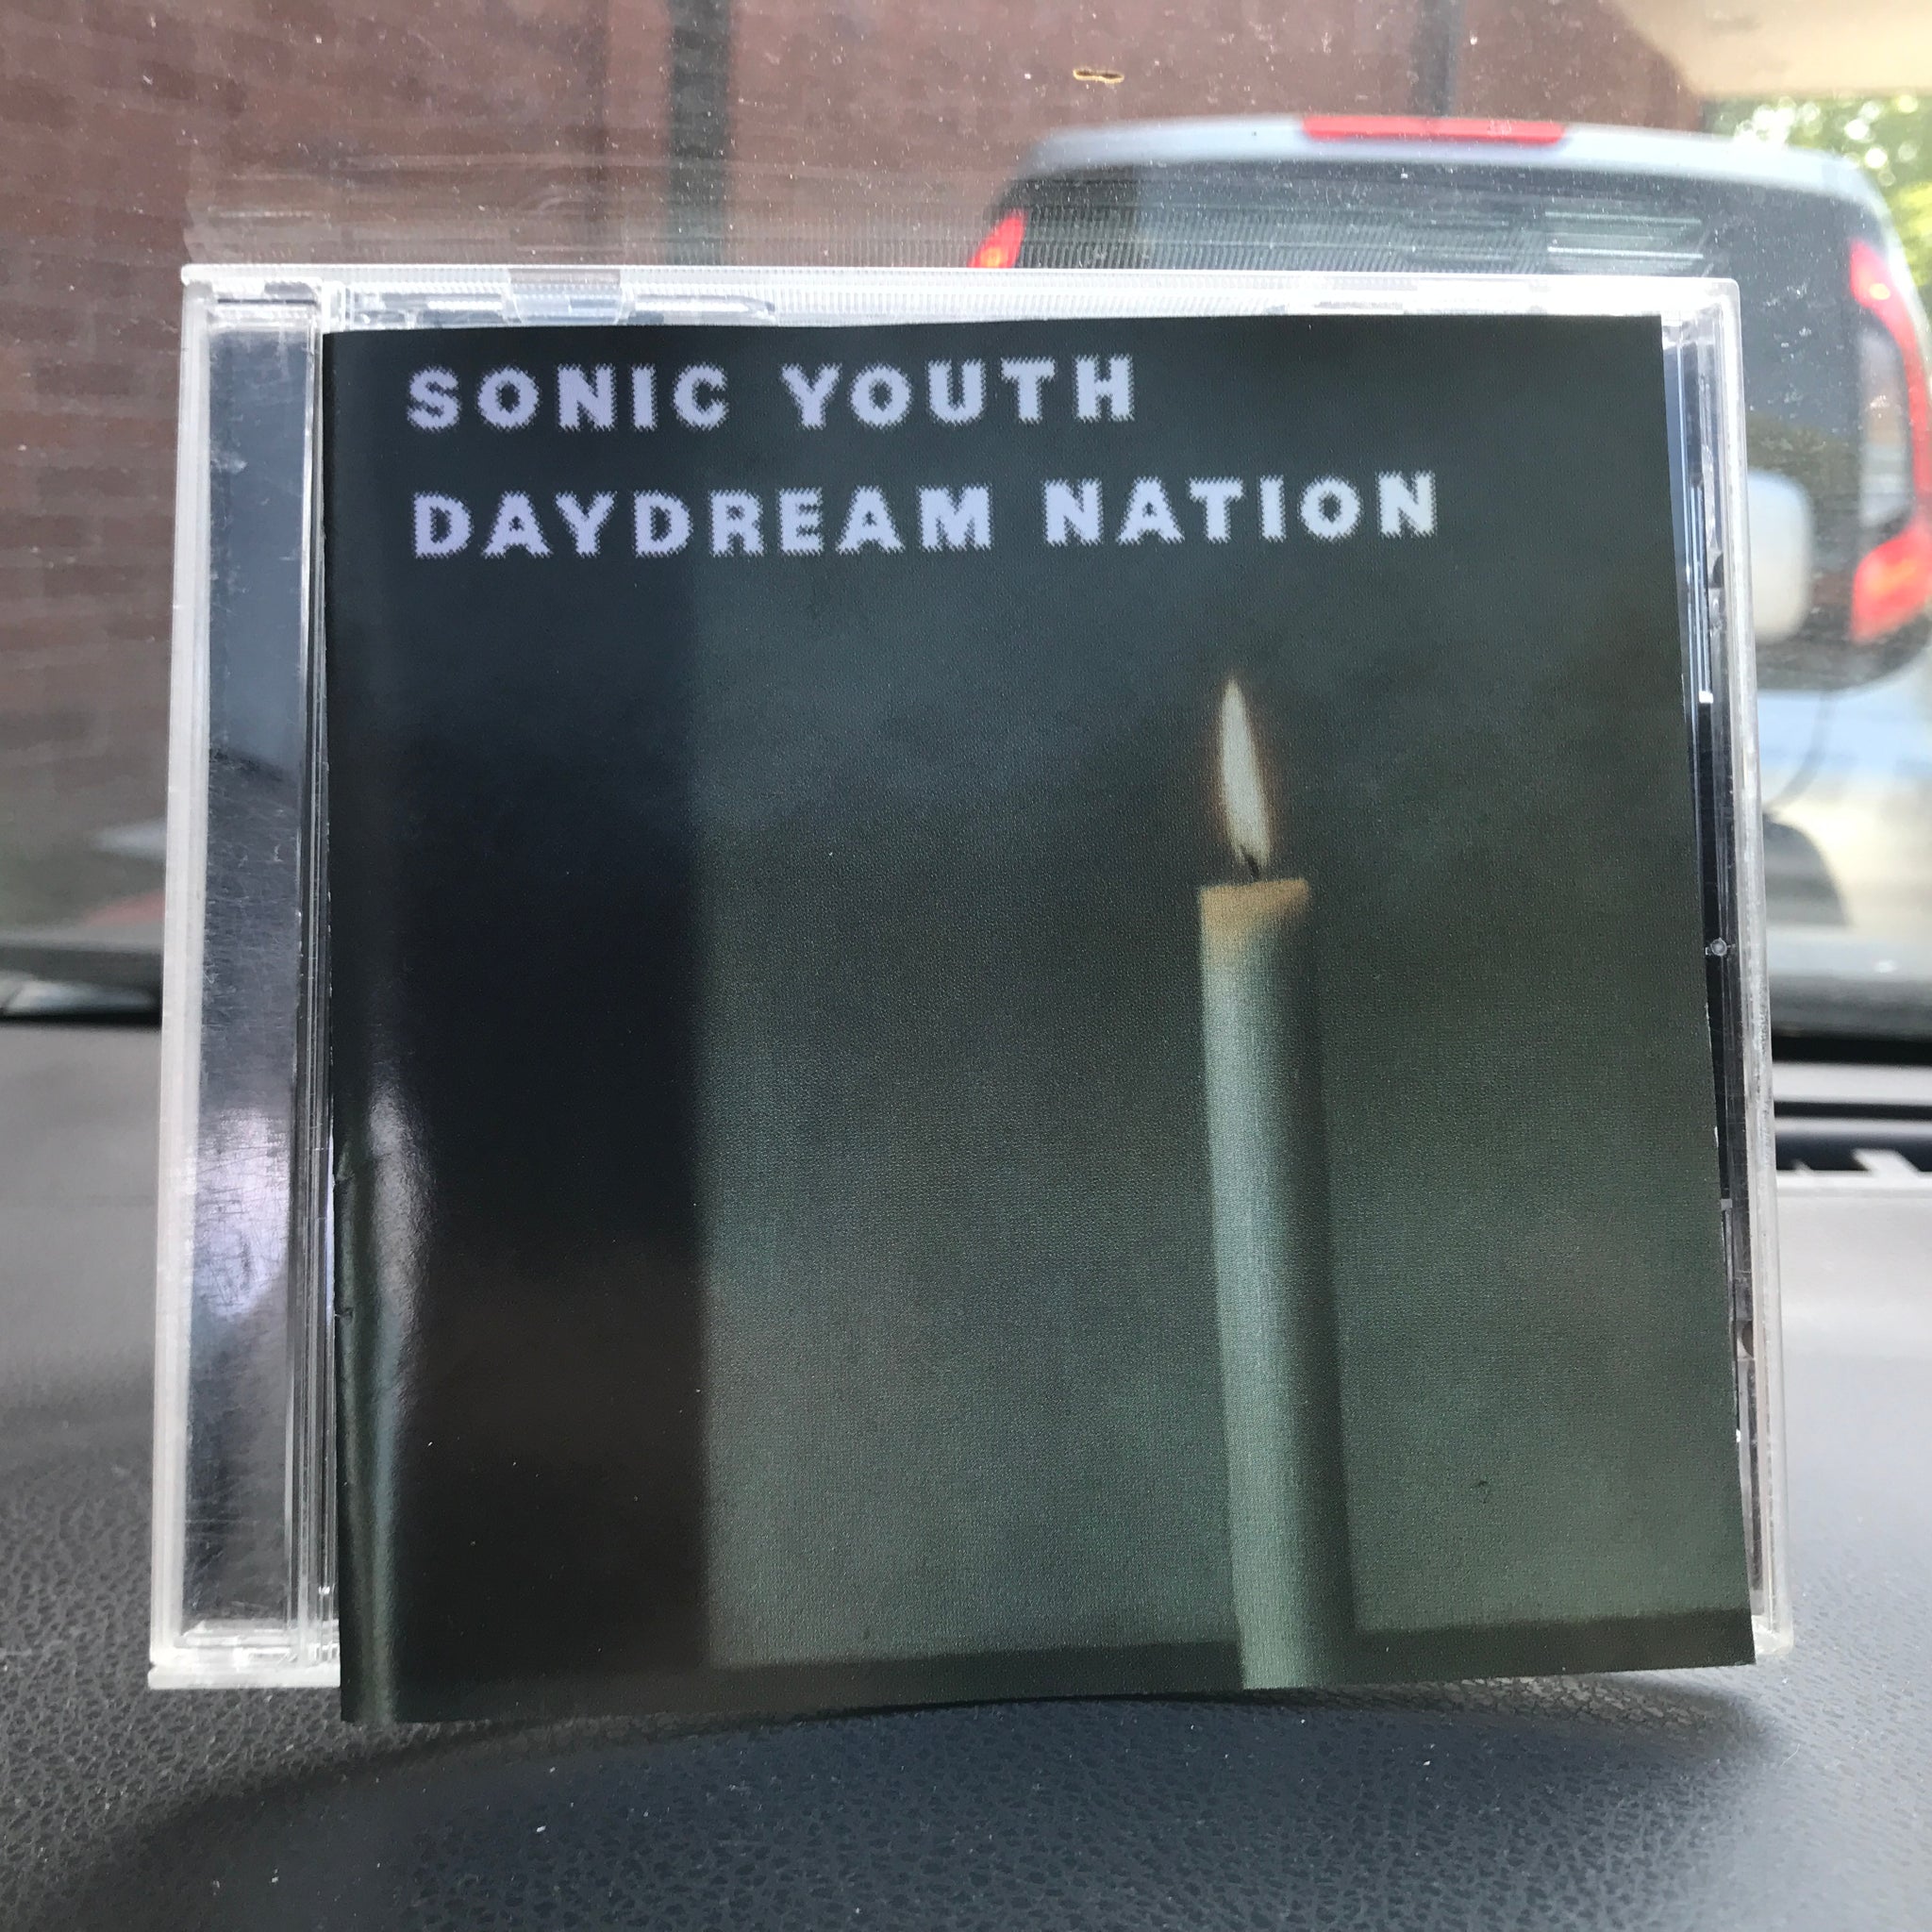 Sonic Youth - Daydream Nation - Used CD